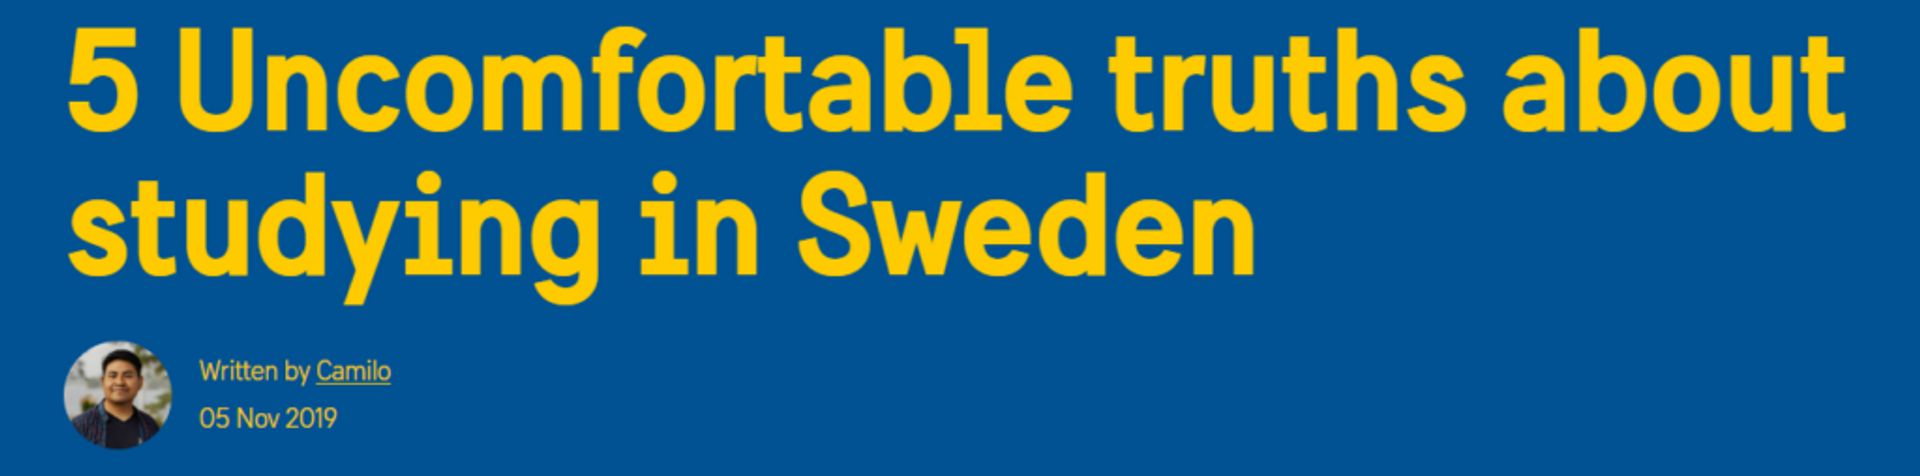 Screenshot of the blog post title: 5 Uncomfortable truths about studying in Sweden